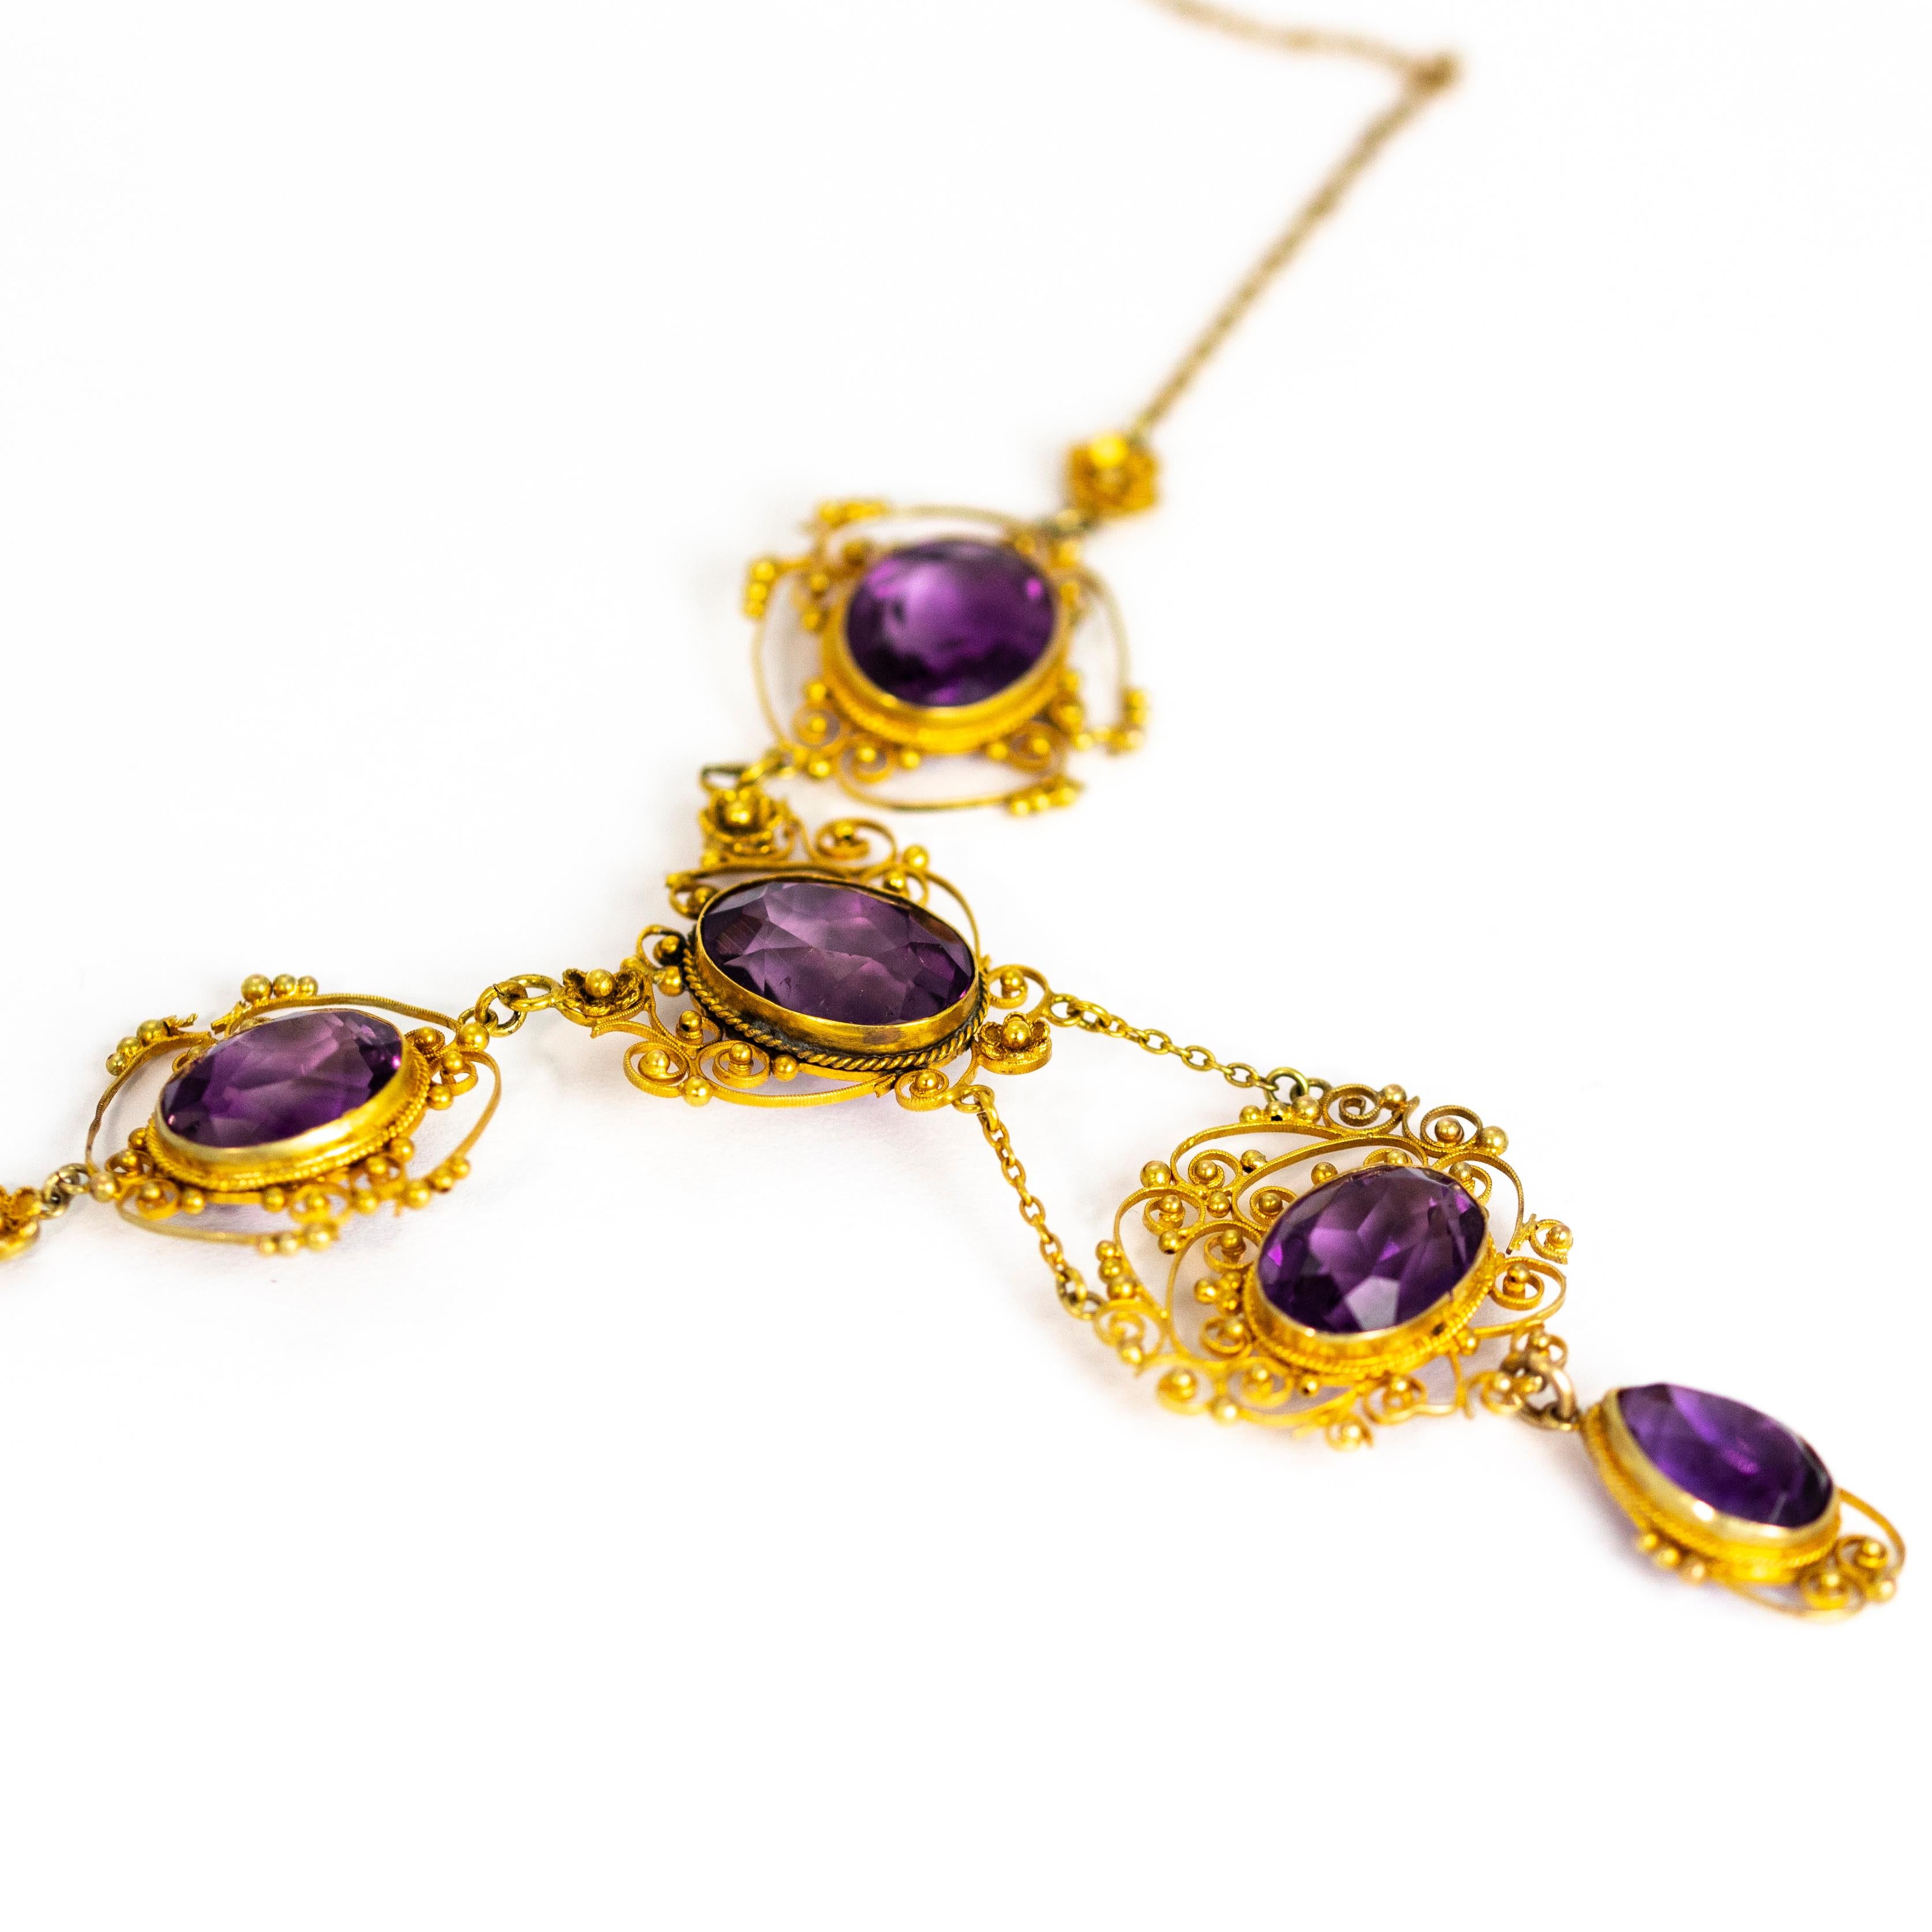 Women's Victorian Amethyst and 15 Carat Gold Filagree Necklace